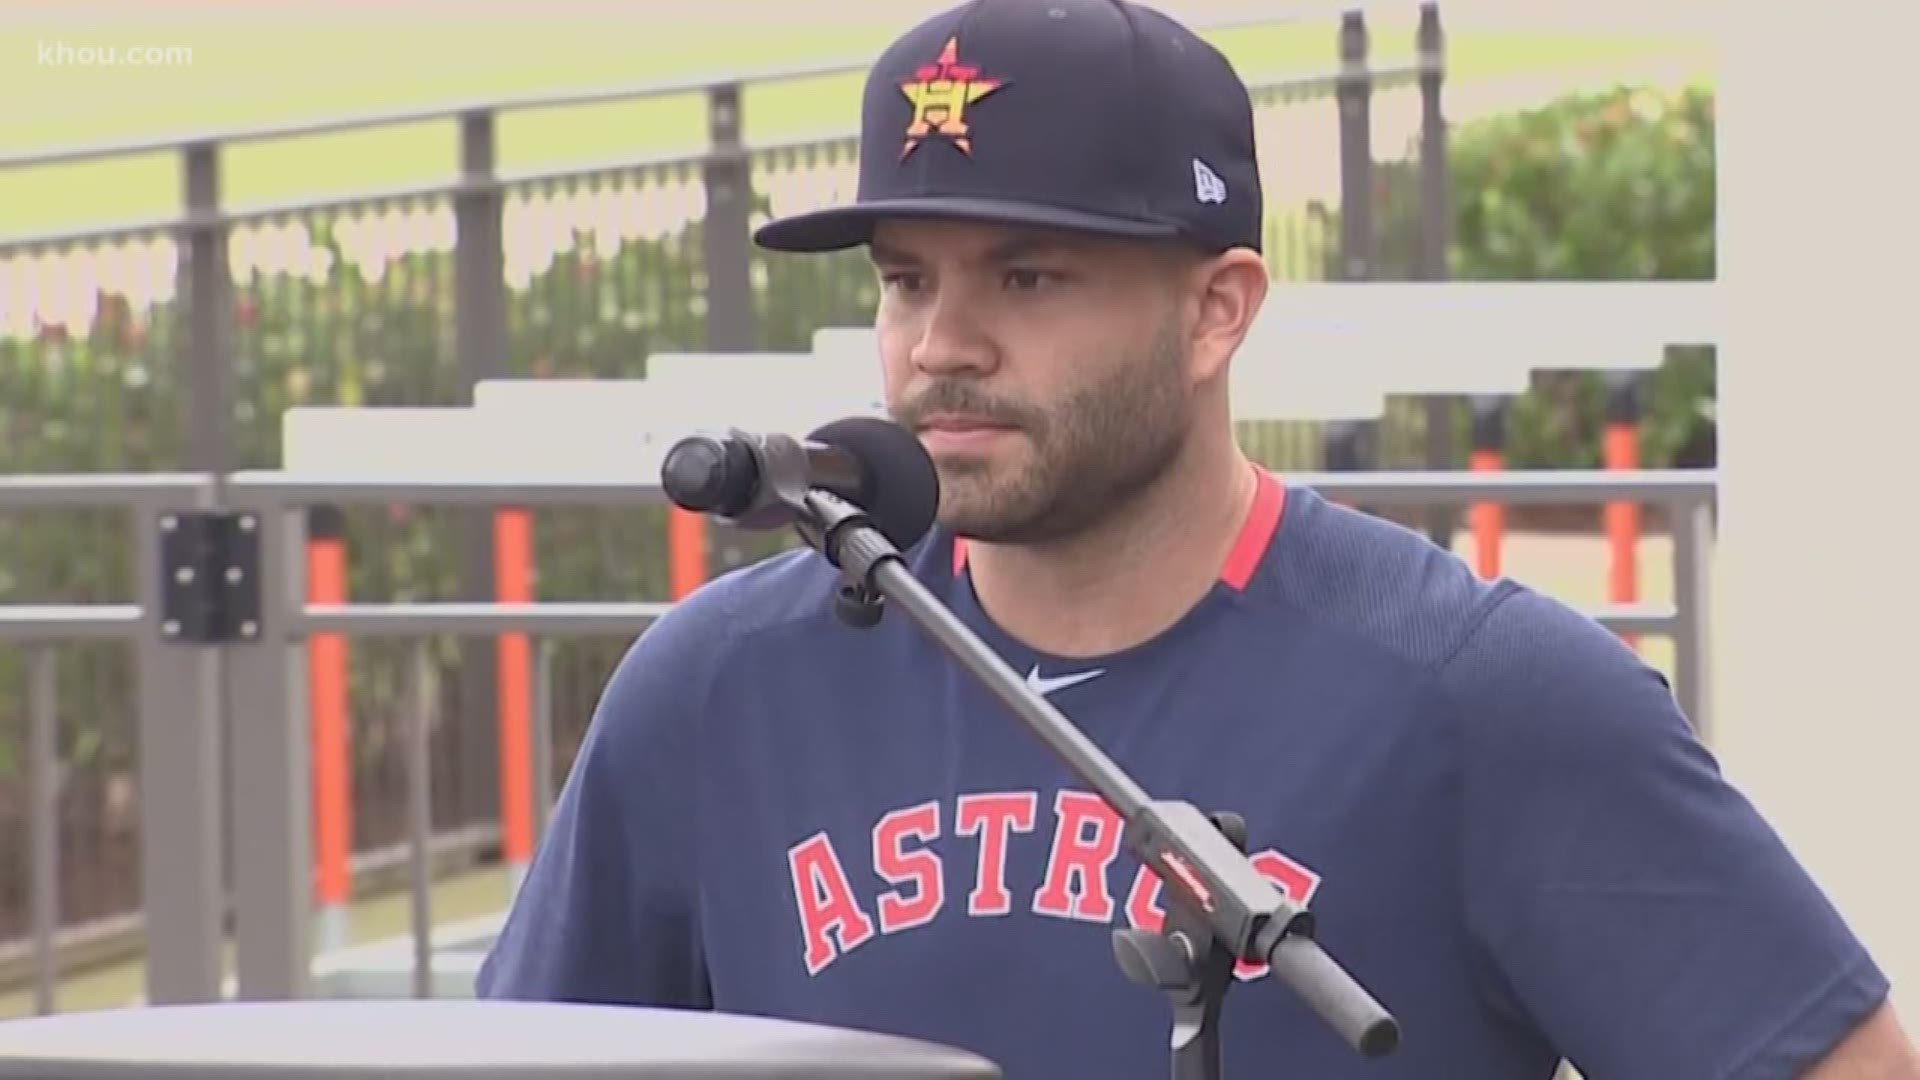 Houston Astros fans had mixed reactions to the team's apologies about their cheating scandal during a news conference on the first day of Spring Training.